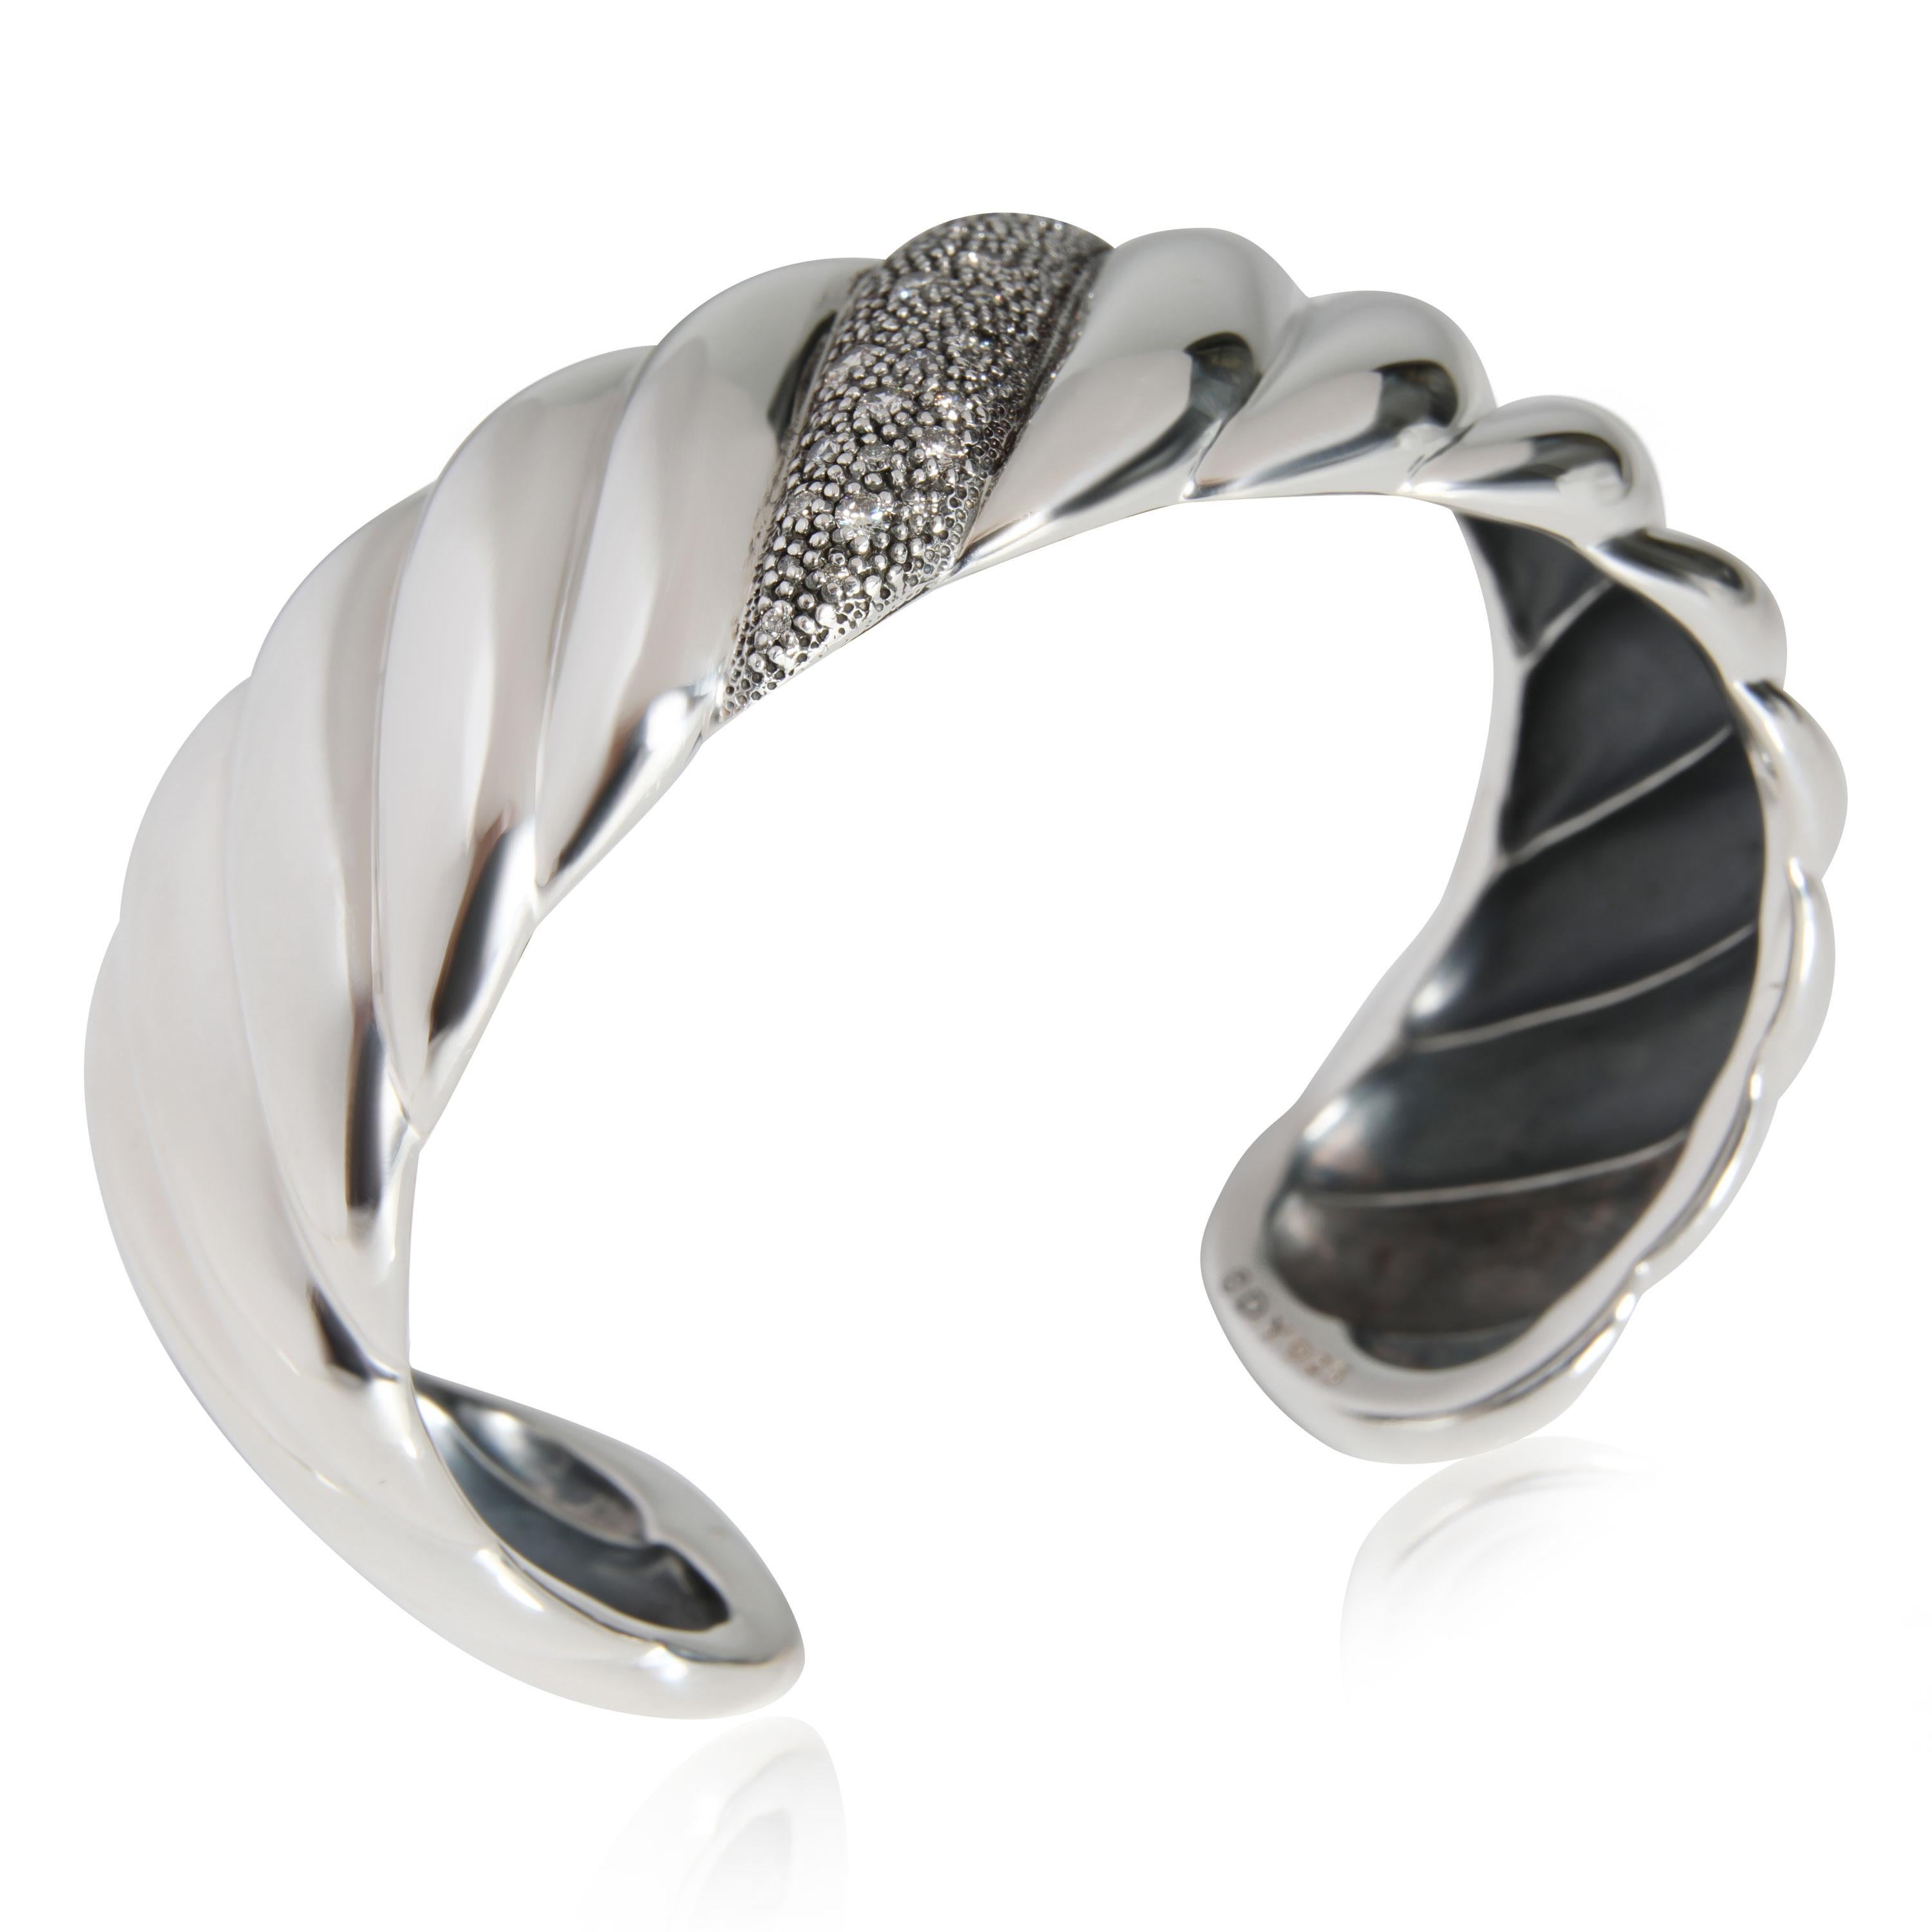 David Yurman Midnight Melange Cable Diamond Cuff in Sterling Silver 0.42 CTW

PRIMARY DETAILS
SKU: 112246
Listing Title: David Yurman Midnight Melange Cable Diamond Cuff in Sterling Silver 0.42 CTW
Condition Description: Retails for USD 4,750. DY